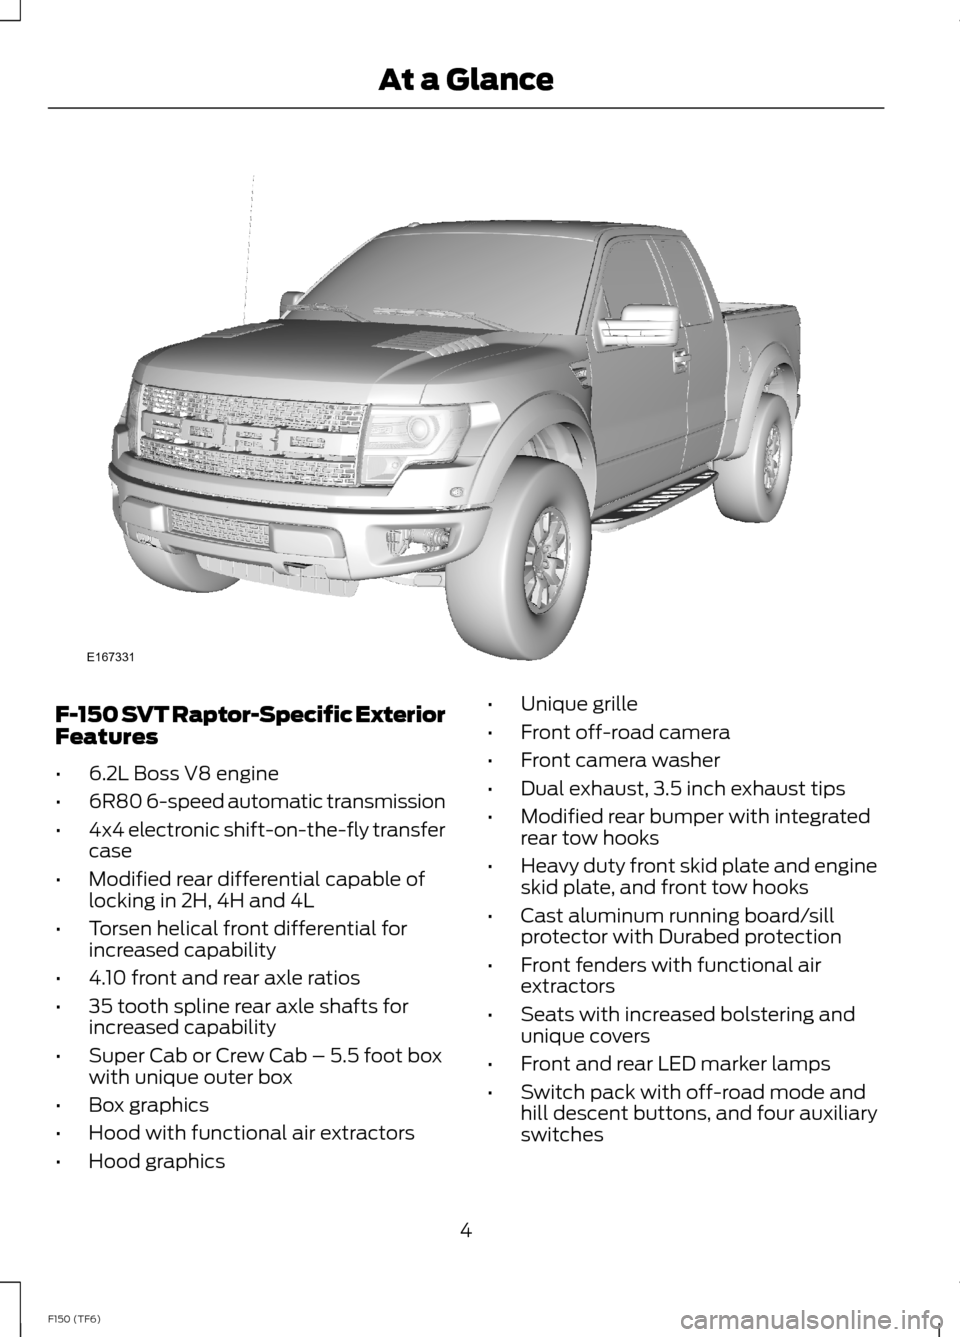 FORD F150 2014 12.G Raptor Supplement Manual F-150 SVT Raptor-Specific ExteriorFeatures
•6.2L Boss V8 engine
•6R80 6-speed automatic transmission
•4x4 electronic shift-on-the-fly transfercase
•Modified rear differential capable oflocking